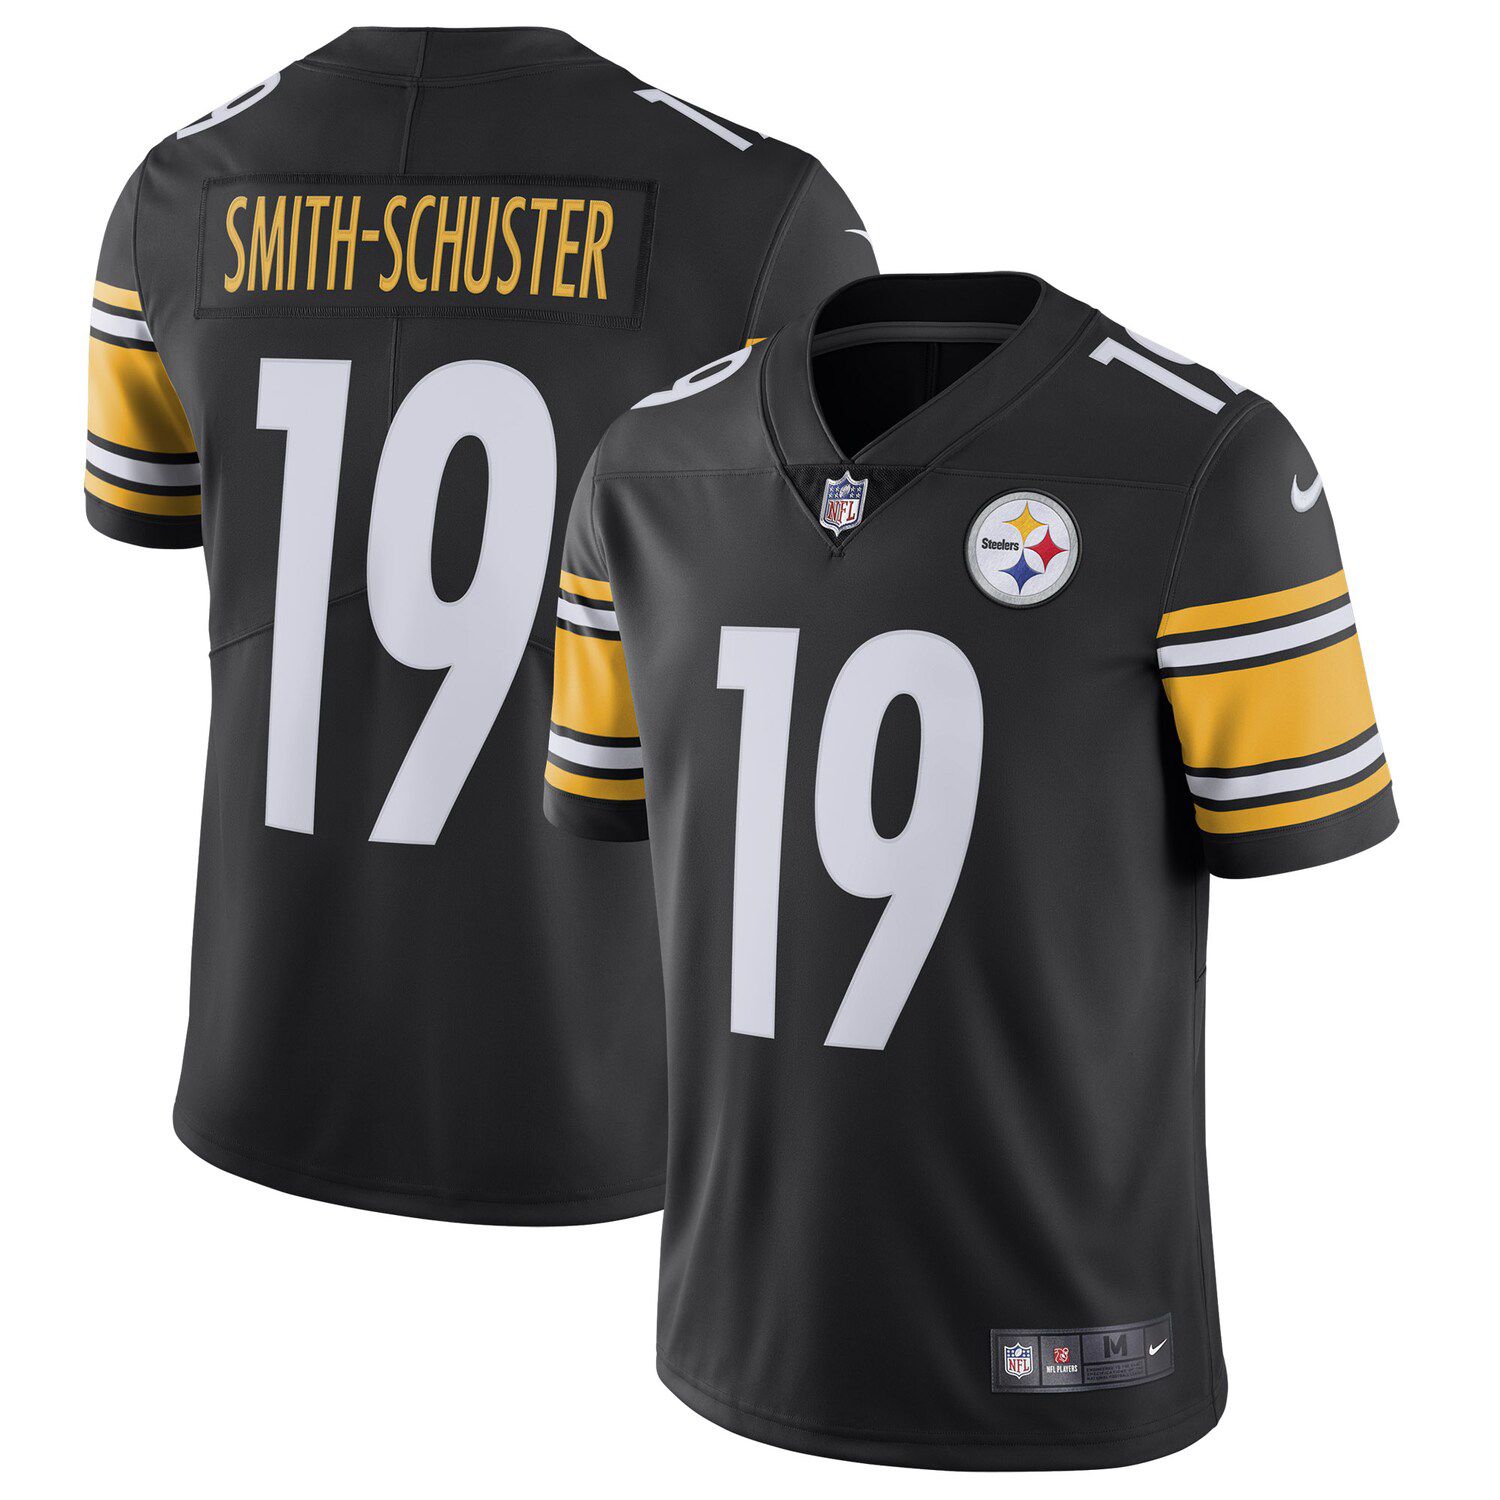 steelers number 10 jersey